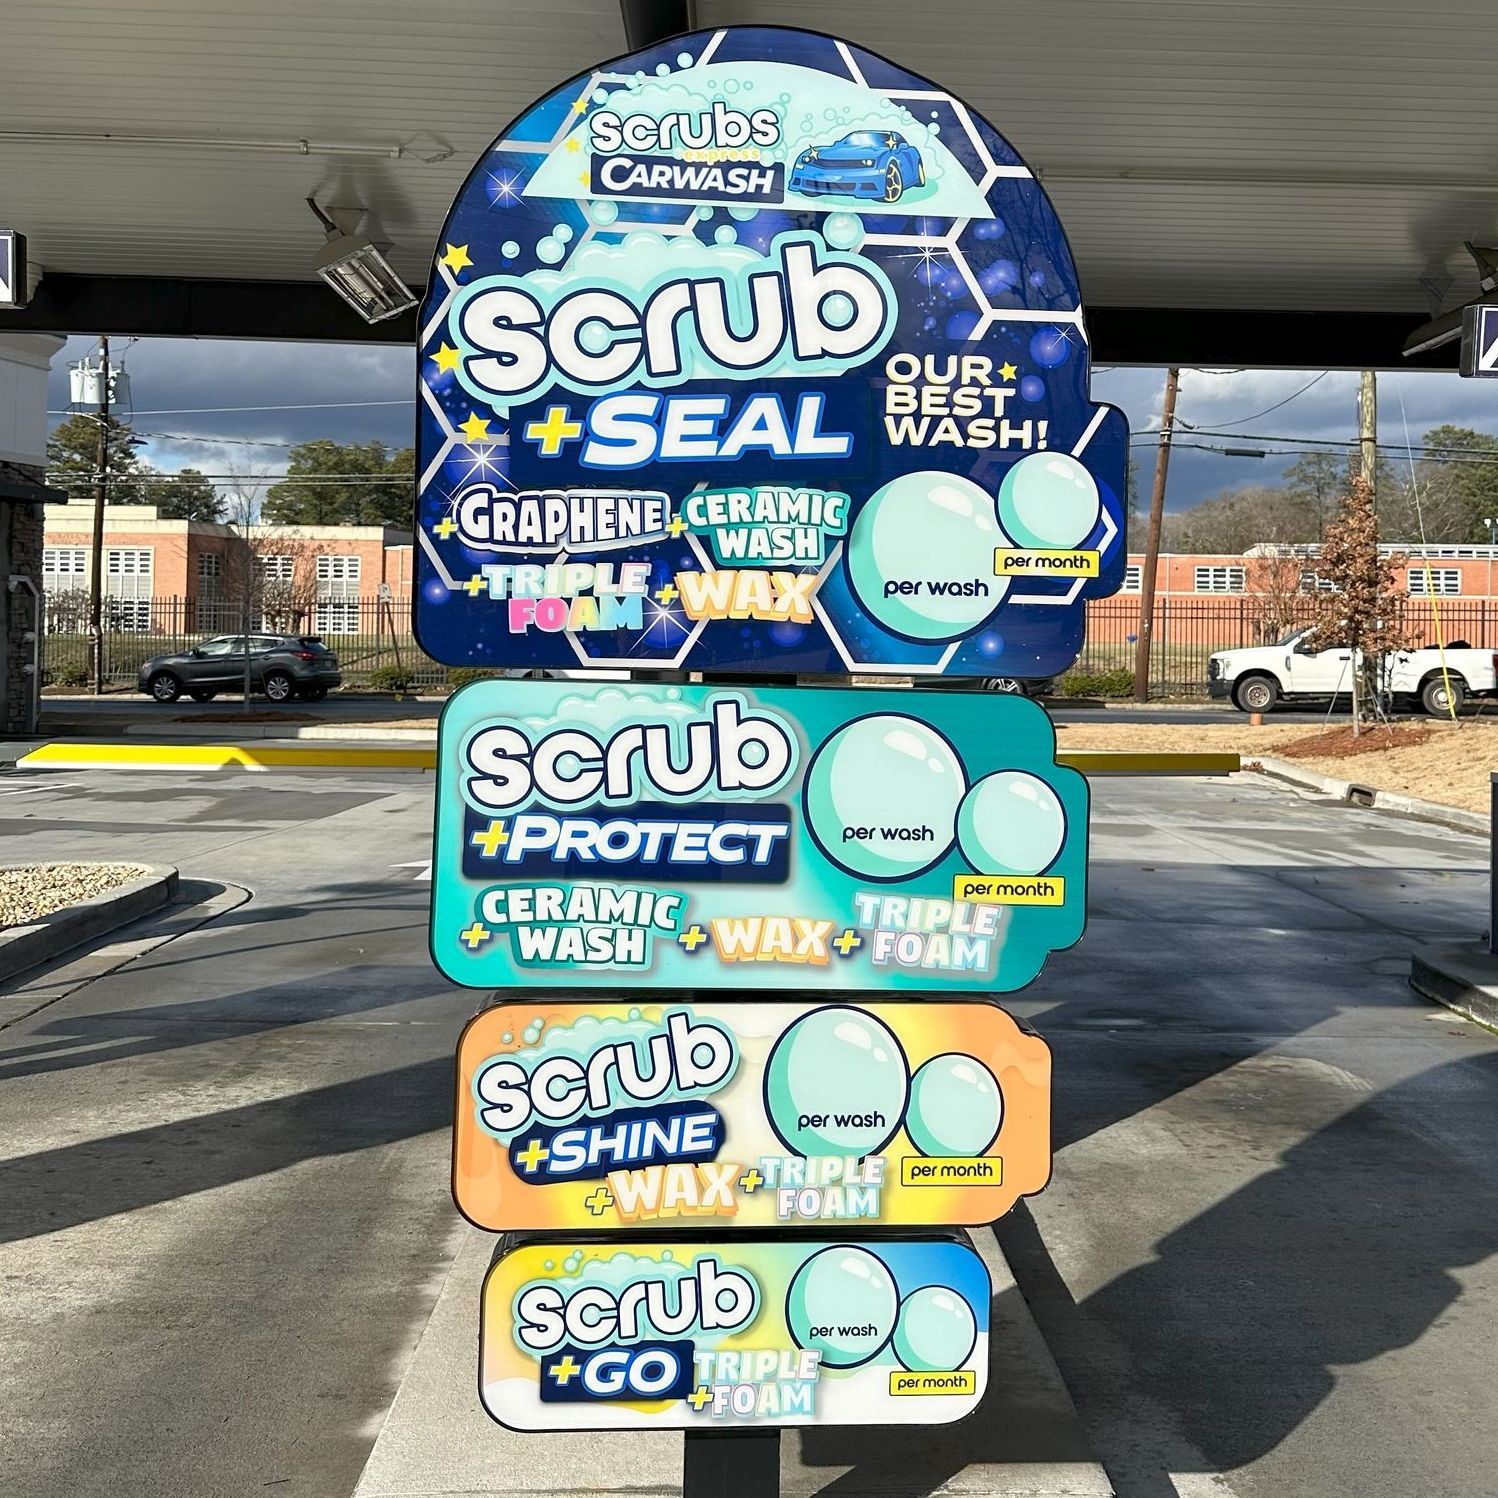 CARWASH MENU GRAPHIC DESIGN. Custom graphic design services to build a psychology based wash menu to make your customers choose your top wash package.